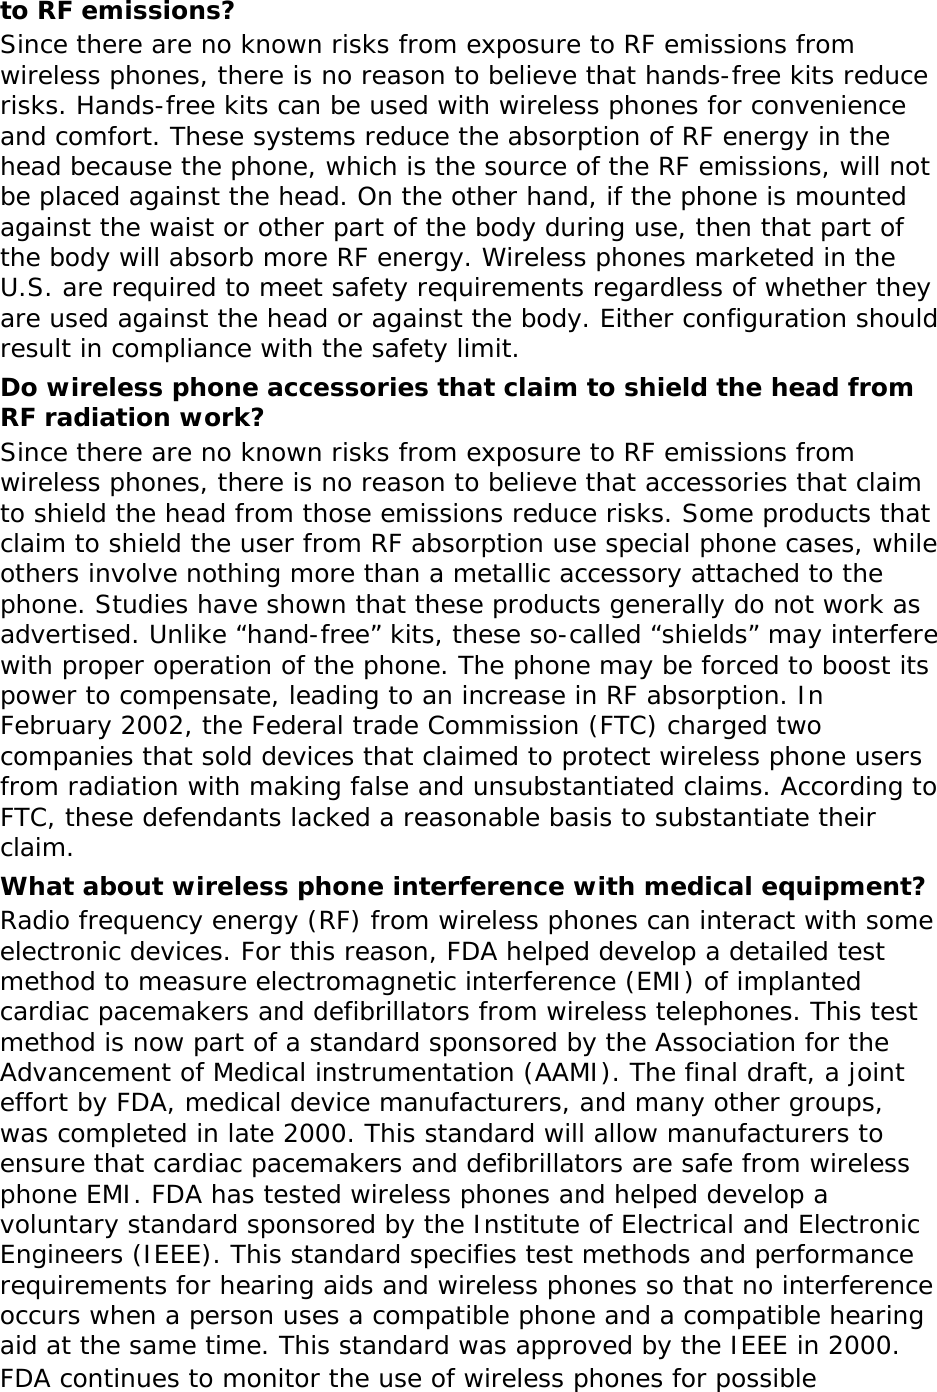 to RF emissions? Since there are no known risks from exposure to RF emissions from wireless phones, there is no reason to believe that hands-free kits reduce risks. Hands-free kits can be used with wireless phones for convenience and comfort. These systems reduce the absorption of RF energy in the head because the phone, which is the source of the RF emissions, will not be placed against the head. On the other hand, if the phone is mounted against the waist or other part of the body during use, then that part of the body will absorb more RF energy. Wireless phones marketed in the U.S. are required to meet safety requirements regardless of whether they are used against the head or against the body. Either configuration should result in compliance with the safety limit. Do wireless phone accessories that claim to shield the head from RF radiation work? Since there are no known risks from exposure to RF emissions from wireless phones, there is no reason to believe that accessories that claim to shield the head from those emissions reduce risks. Some products that claim to shield the user from RF absorption use special phone cases, while others involve nothing more than a metallic accessory attached to the phone. Studies have shown that these products generally do not work as advertised. Unlike “hand-free” kits, these so-called “shields” may interfere with proper operation of the phone. The phone may be forced to boost its power to compensate, leading to an increase in RF absorption. In February 2002, the Federal trade Commission (FTC) charged two companies that sold devices that claimed to protect wireless phone users from radiation with making false and unsubstantiated claims. According to FTC, these defendants lacked a reasonable basis to substantiate their claim. What about wireless phone interference with medical equipment? Radio frequency energy (RF) from wireless phones can interact with some electronic devices. For this reason, FDA helped develop a detailed test method to measure electromagnetic interference (EMI) of implanted cardiac pacemakers and defibrillators from wireless telephones. This test method is now part of a standard sponsored by the Association for the Advancement of Medical instrumentation (AAMI). The final draft, a joint effort by FDA, medical device manufacturers, and many other groups, was completed in late 2000. This standard will allow manufacturers to ensure that cardiac pacemakers and defibrillators are safe from wireless phone EMI. FDA has tested wireless phones and helped develop a voluntary standard sponsored by the Institute of Electrical and Electronic Engineers (IEEE). This standard specifies test methods and performance requirements for hearing aids and wireless phones so that no interference occurs when a person uses a compatible phone and a compatible hearing aid at the same time. This standard was approved by the IEEE in 2000. FDA continues to monitor the use of wireless phones for possible 